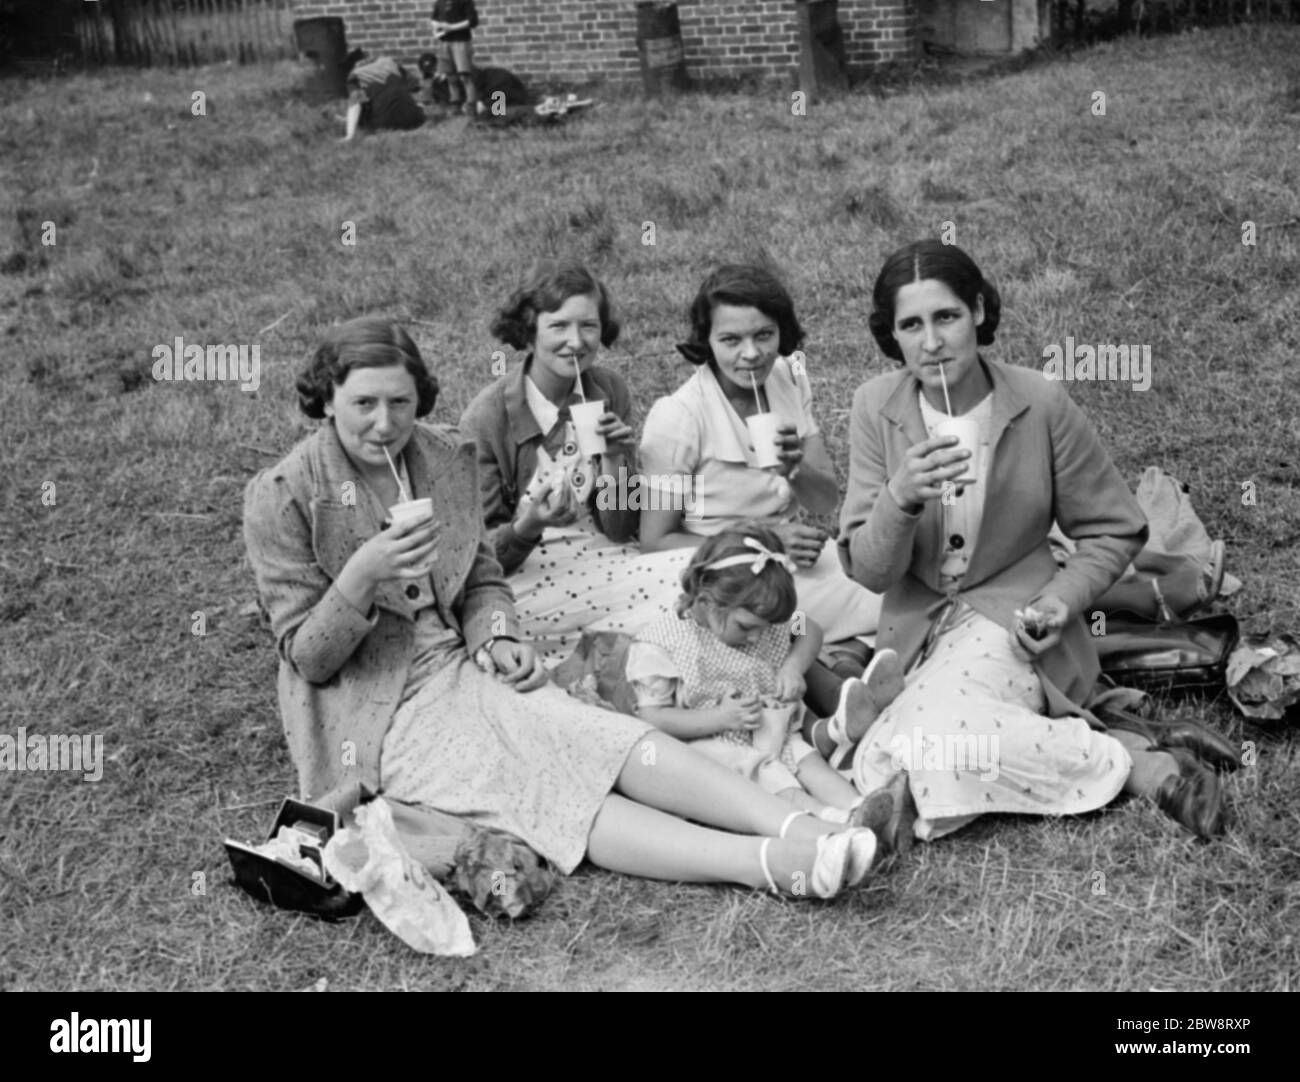 Whitbread ' s hop farm in Belting , Kent . Some ladys are enjoying a cup of milk from the onsite milk bar . 1938 Stock Photo